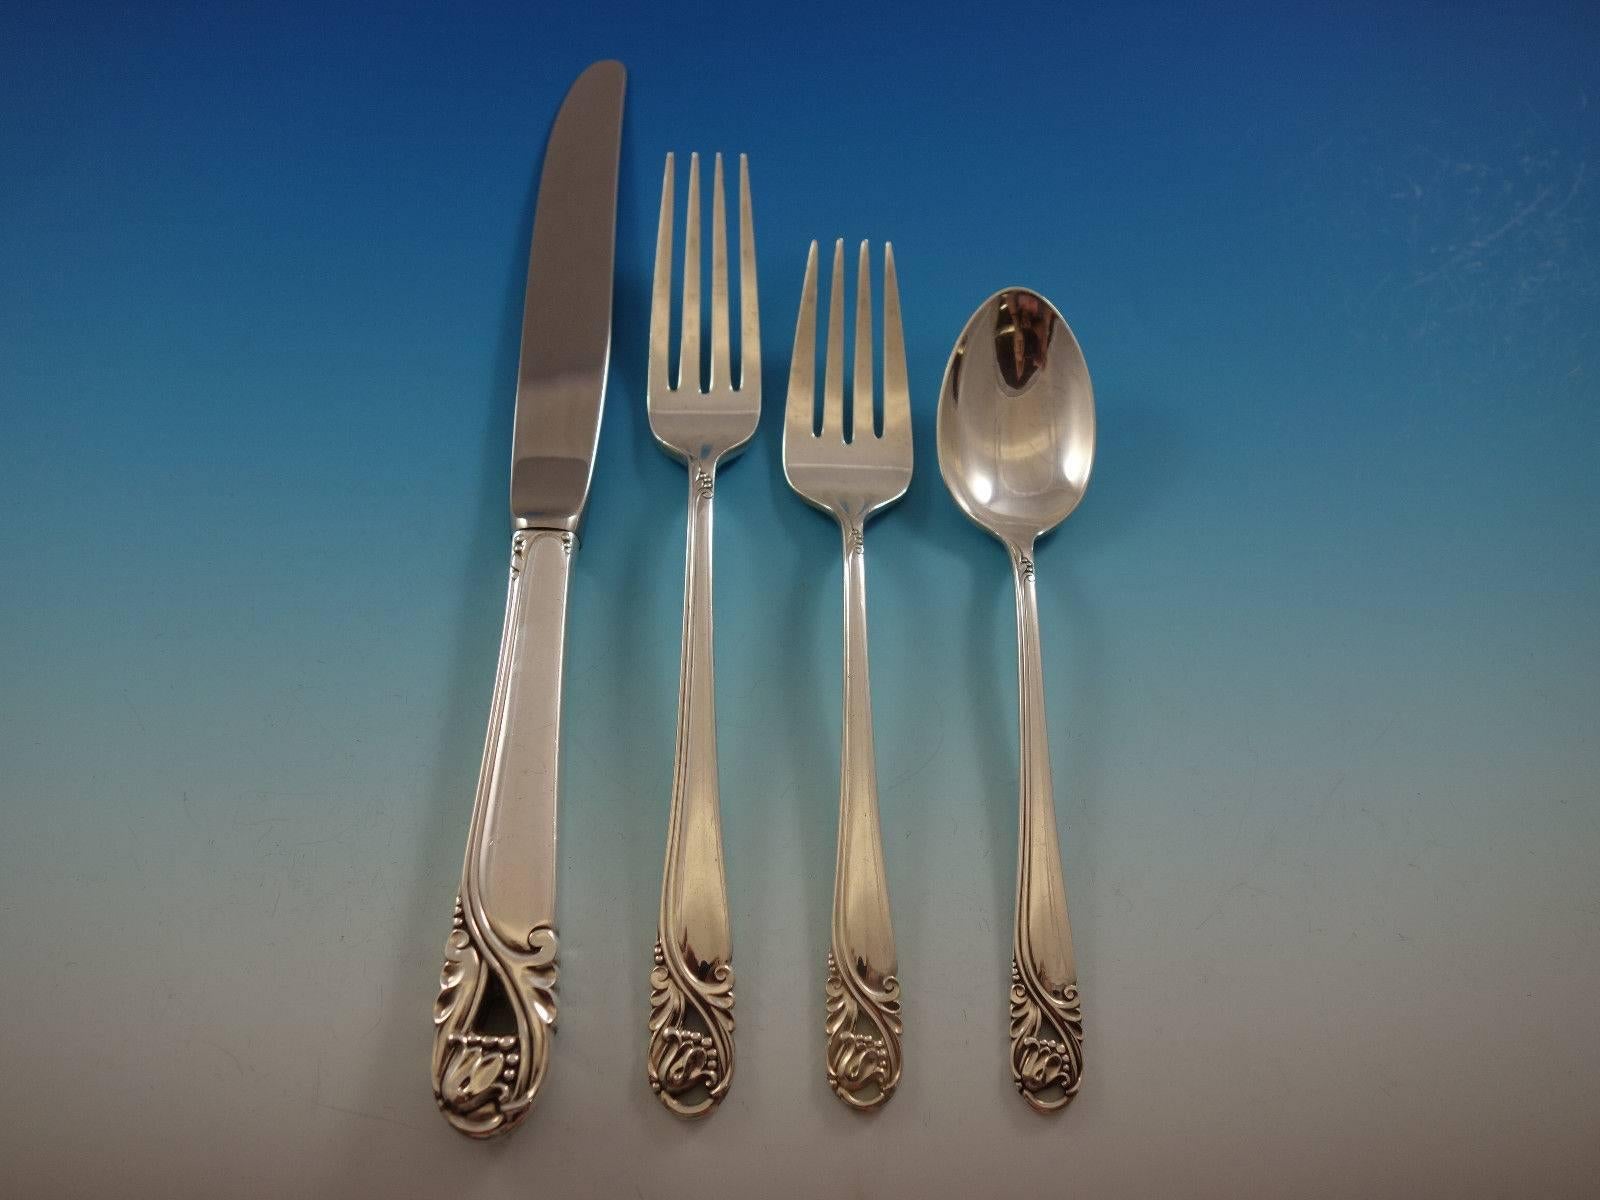 Massive sterling silver service for 96 in the pattern spring glory by International - 623 pieces. This set includes: 

96 knives, 9 1/4